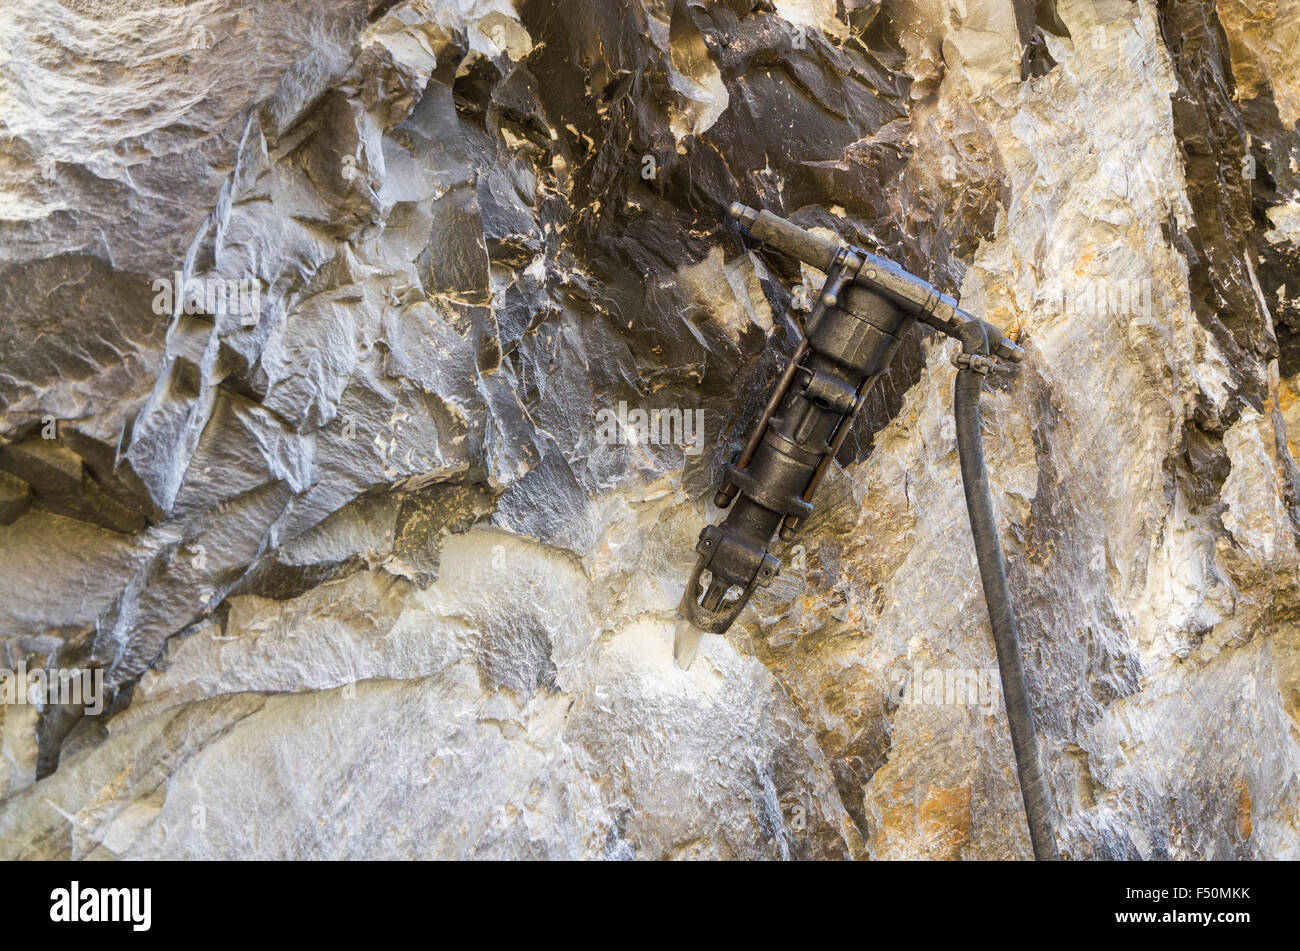 Pneumatic hammer to construct a road, dangerously leading along a steep valley Stock Photo